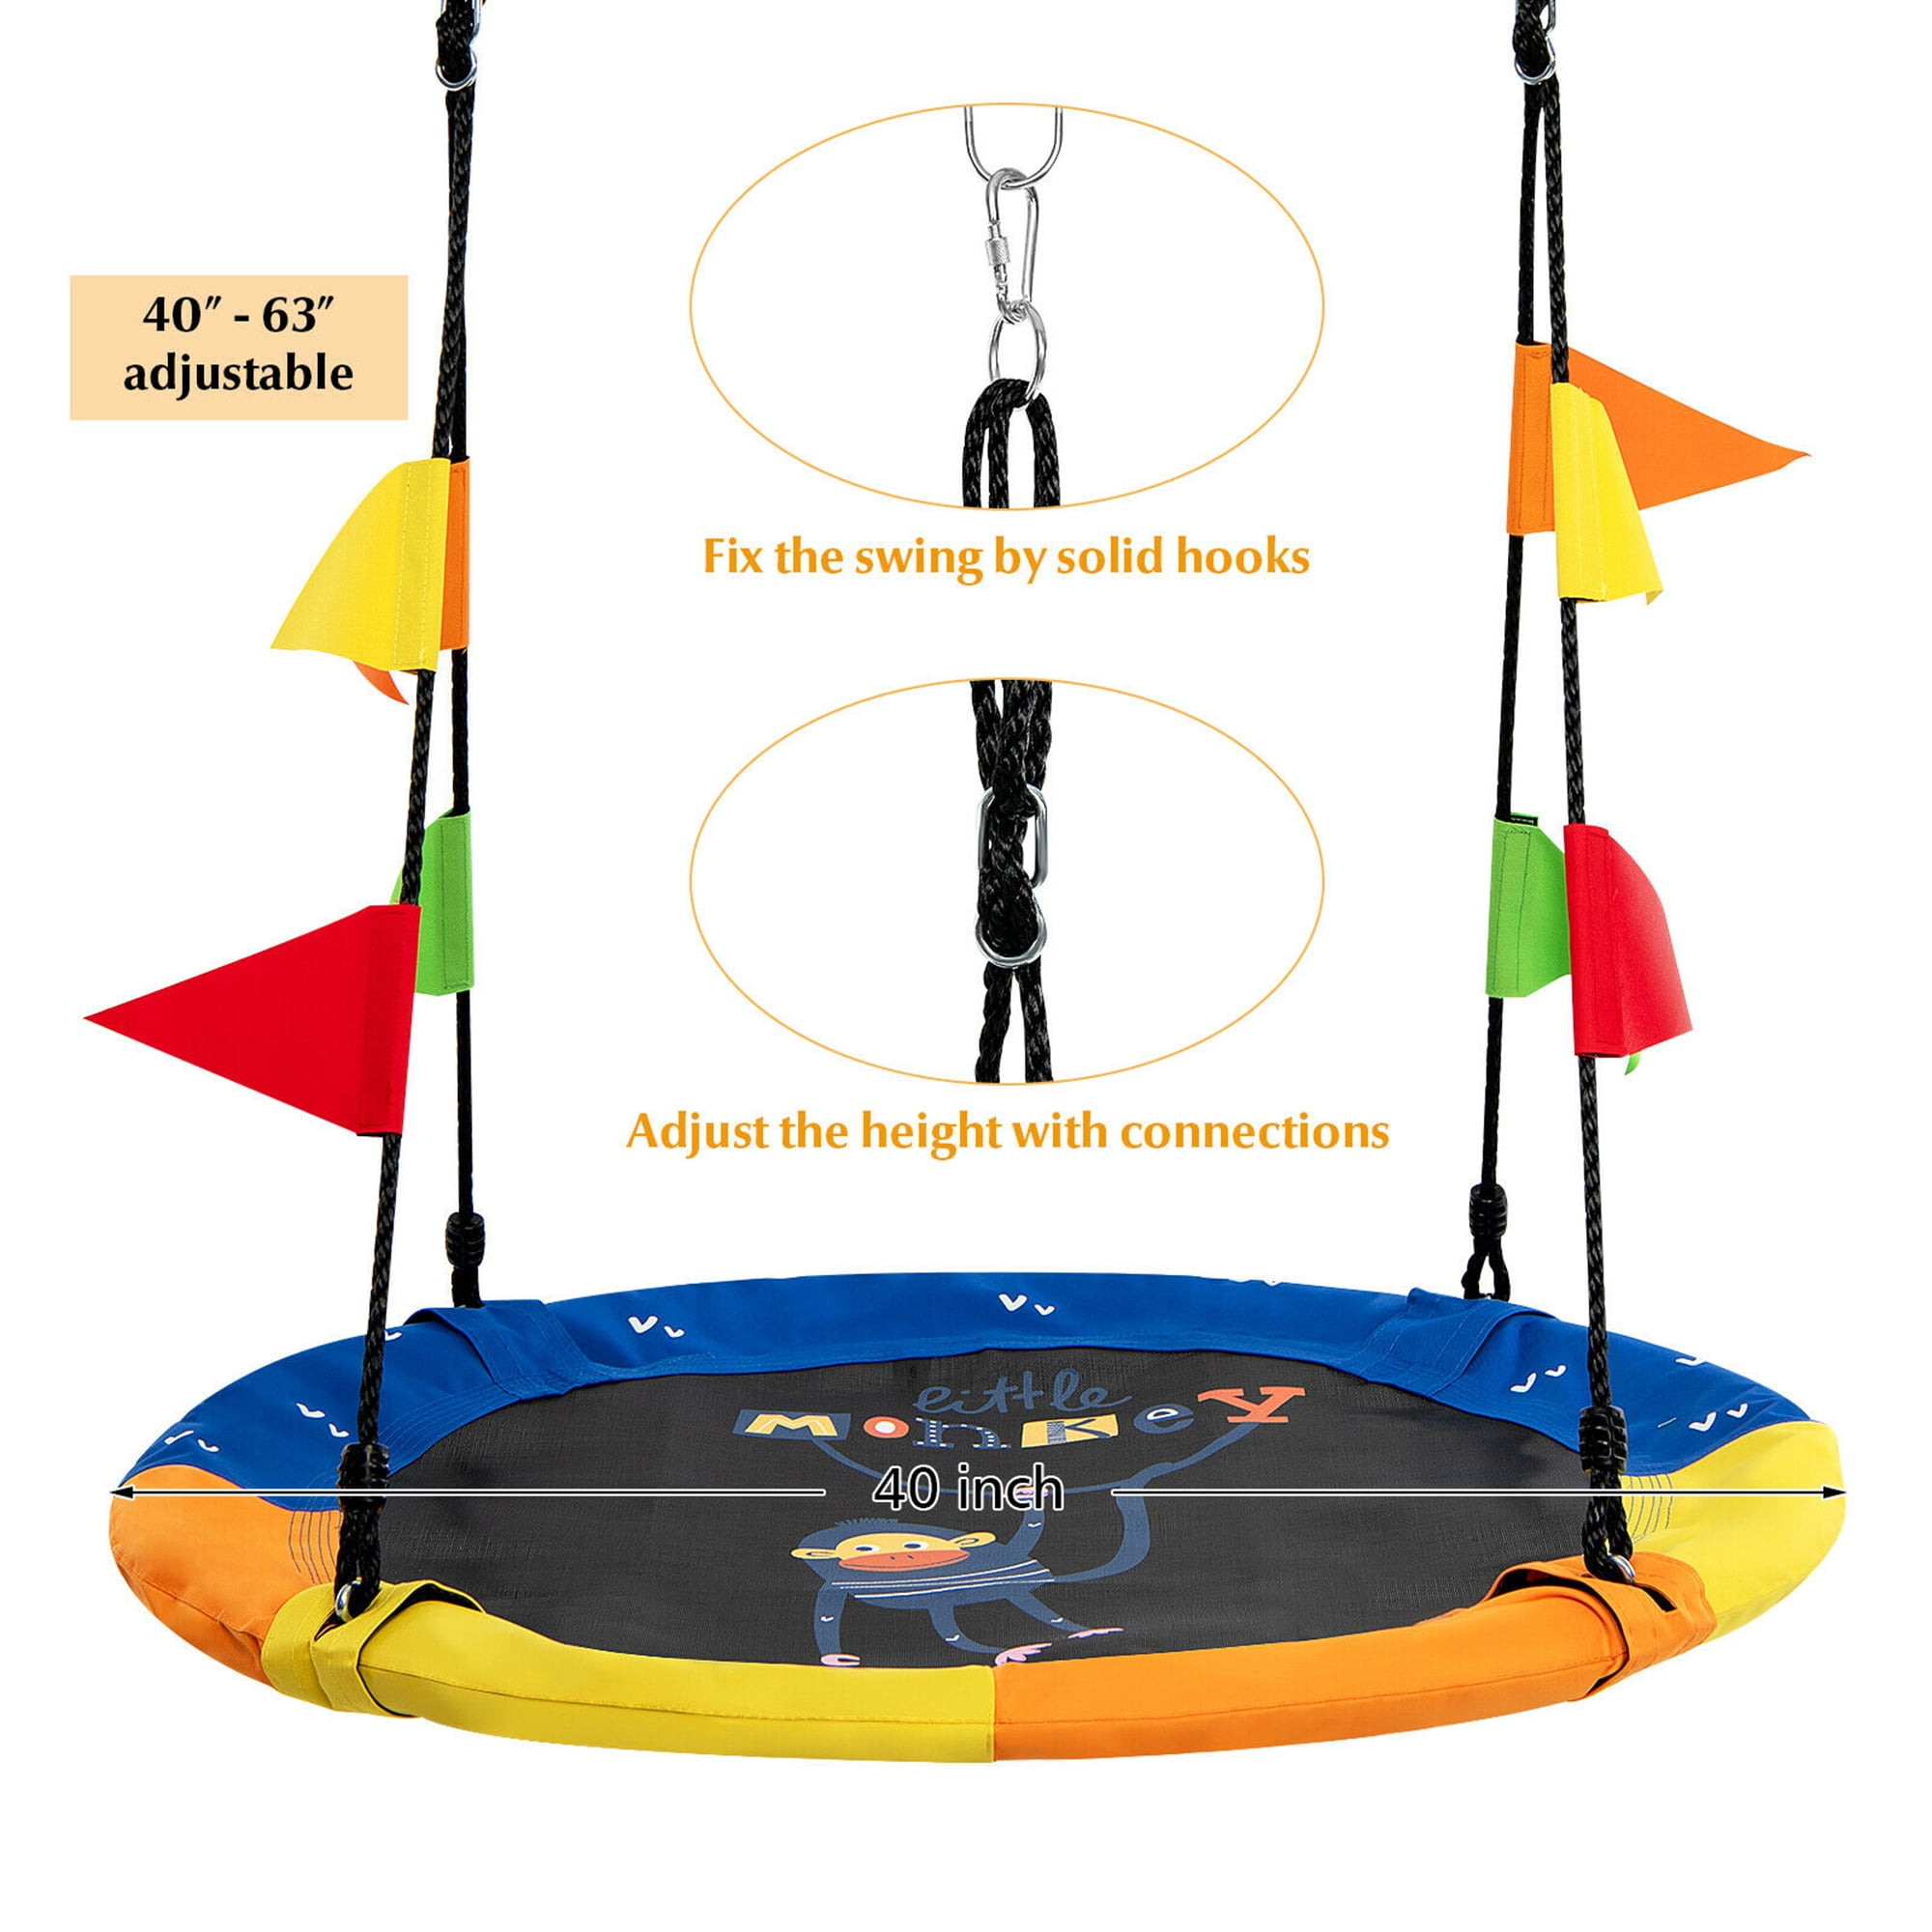 Gymax 40'' Flying Saucer Tree Swing Indoor Outdoor Swing w/Hanging Straps  Monkey 